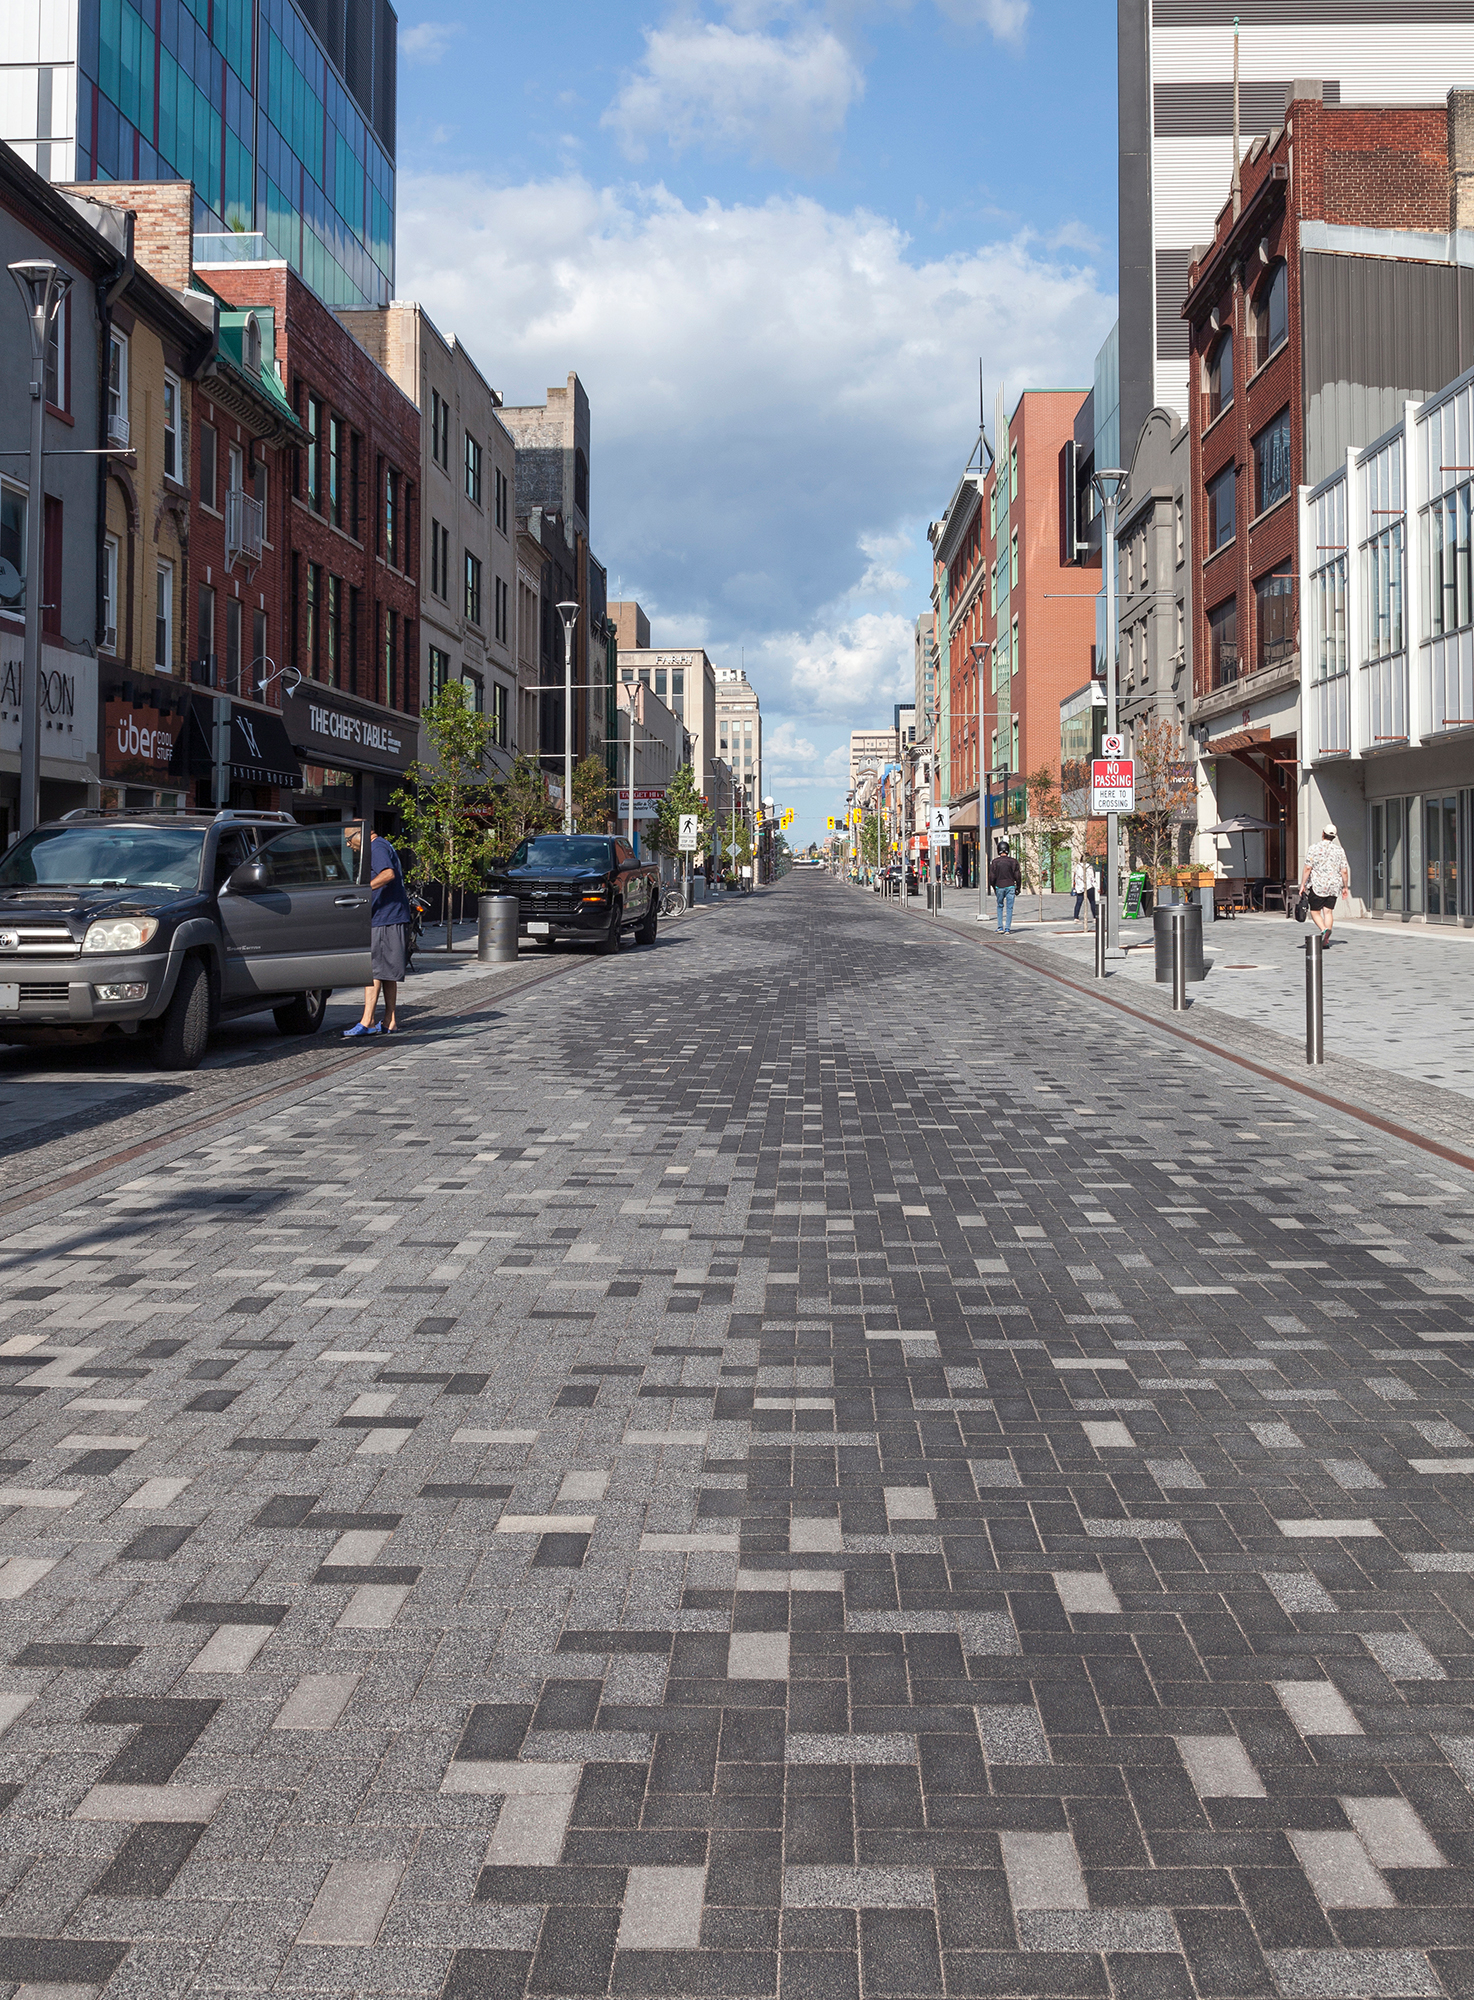 People park and walk along Dundas Place streetscape, paved with Series in pixelated patterns with a curvy zig-zag in the center.